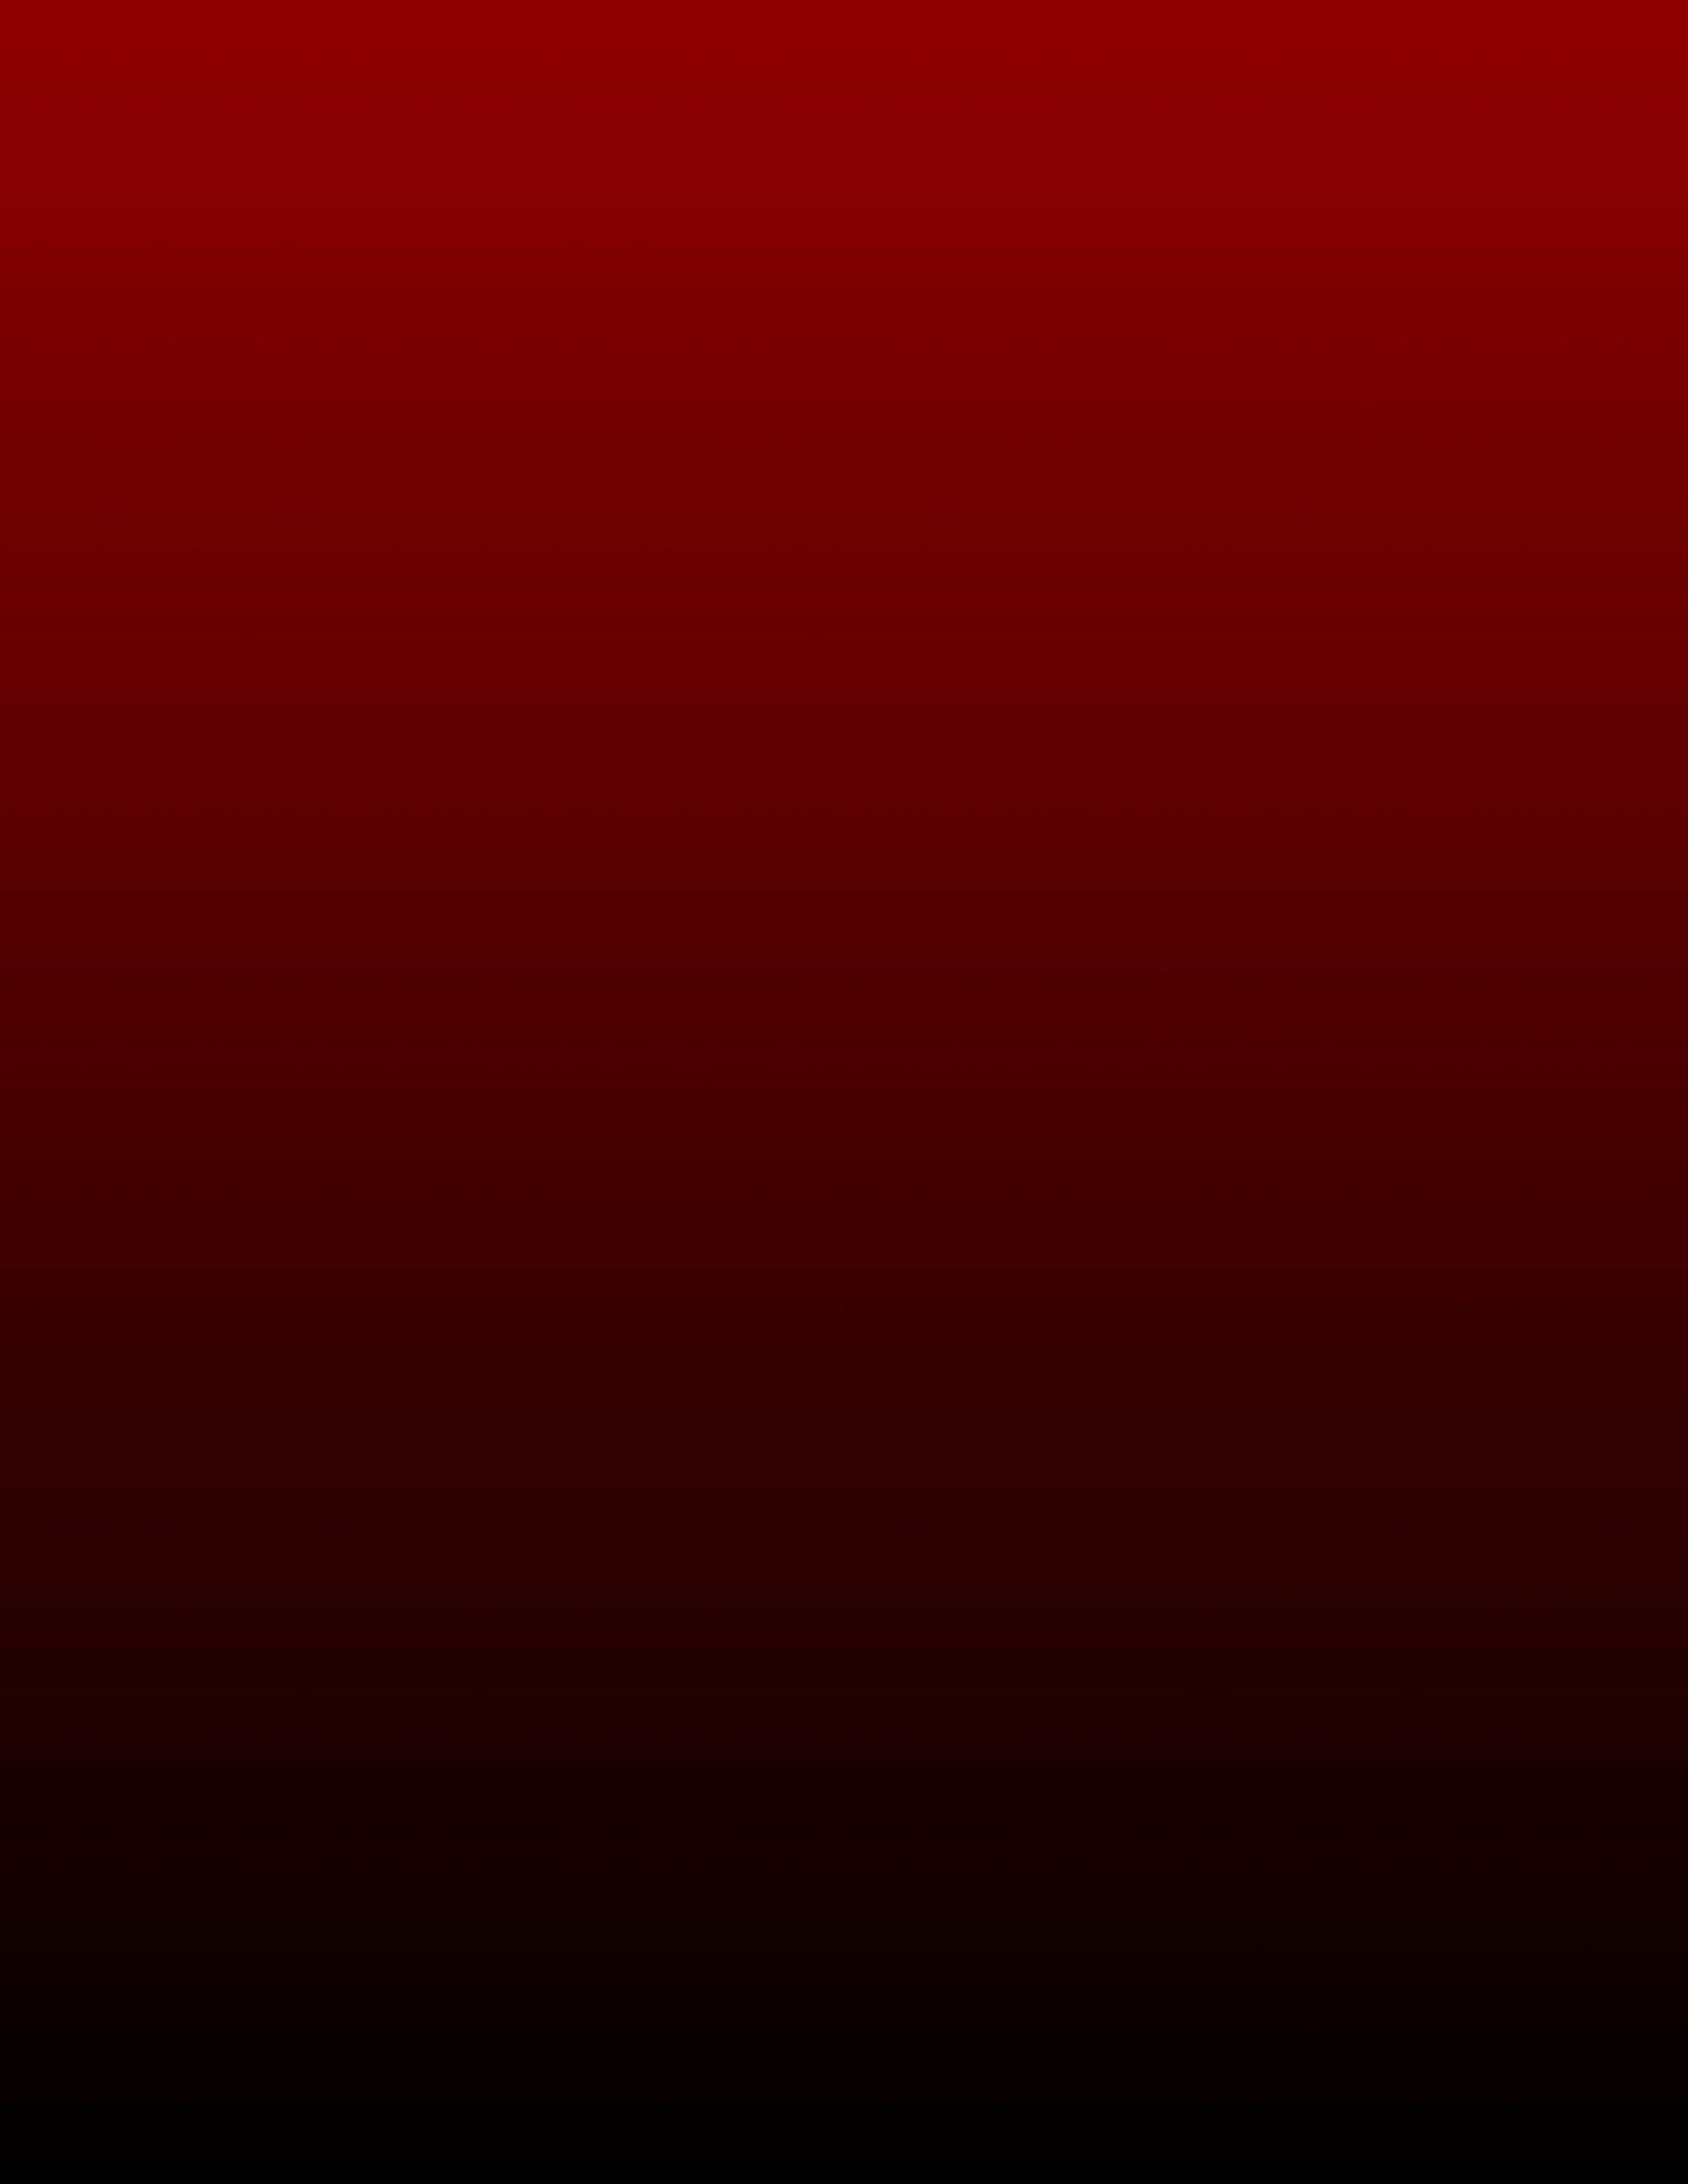 Red Gradient iPhone Wallpapers - Wallpaper Cave